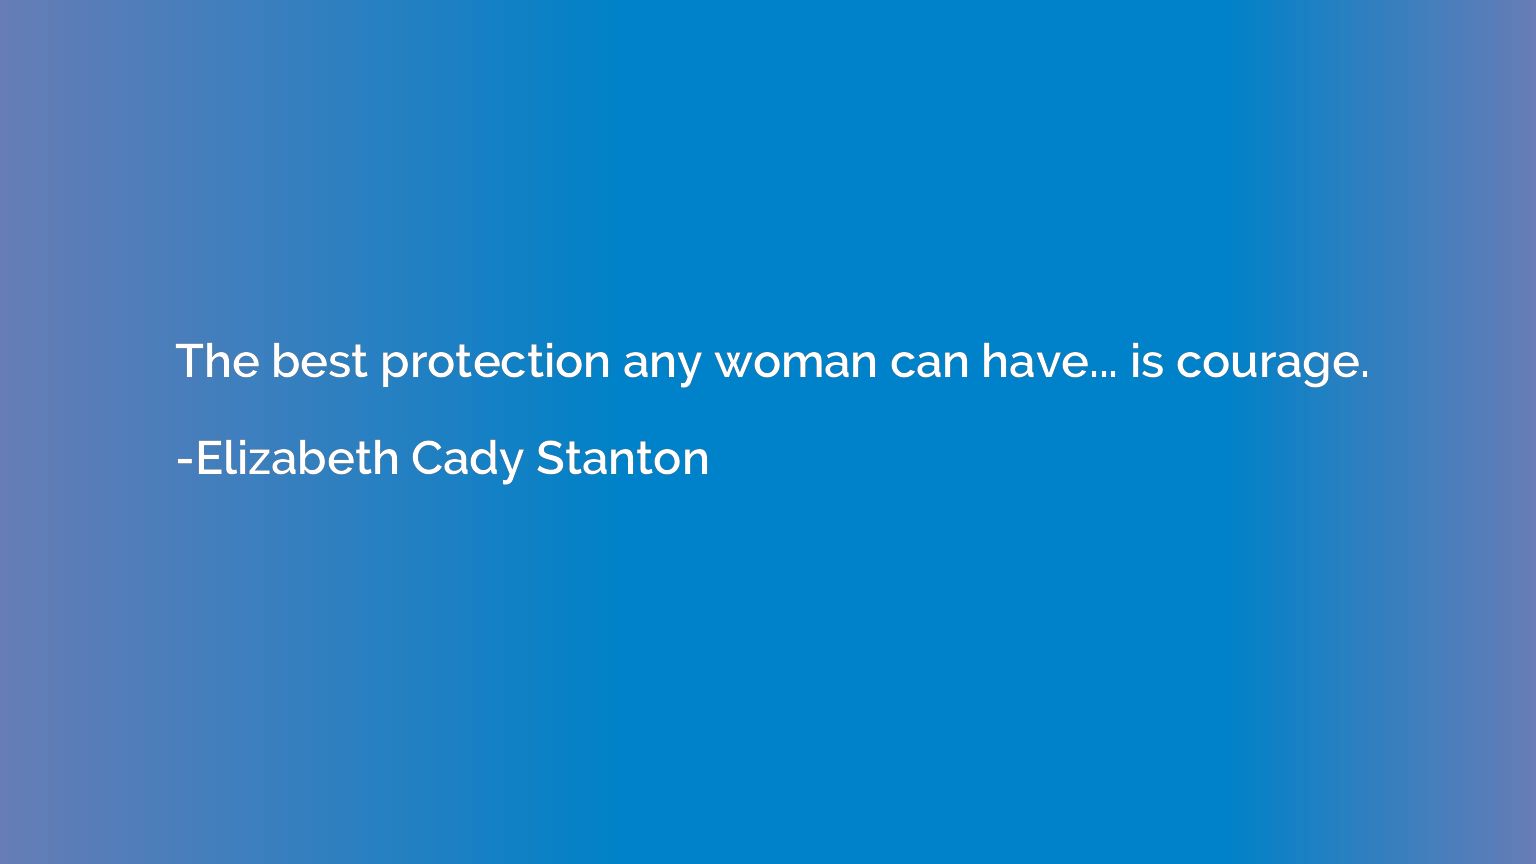 The best protection any woman can have... is courage.